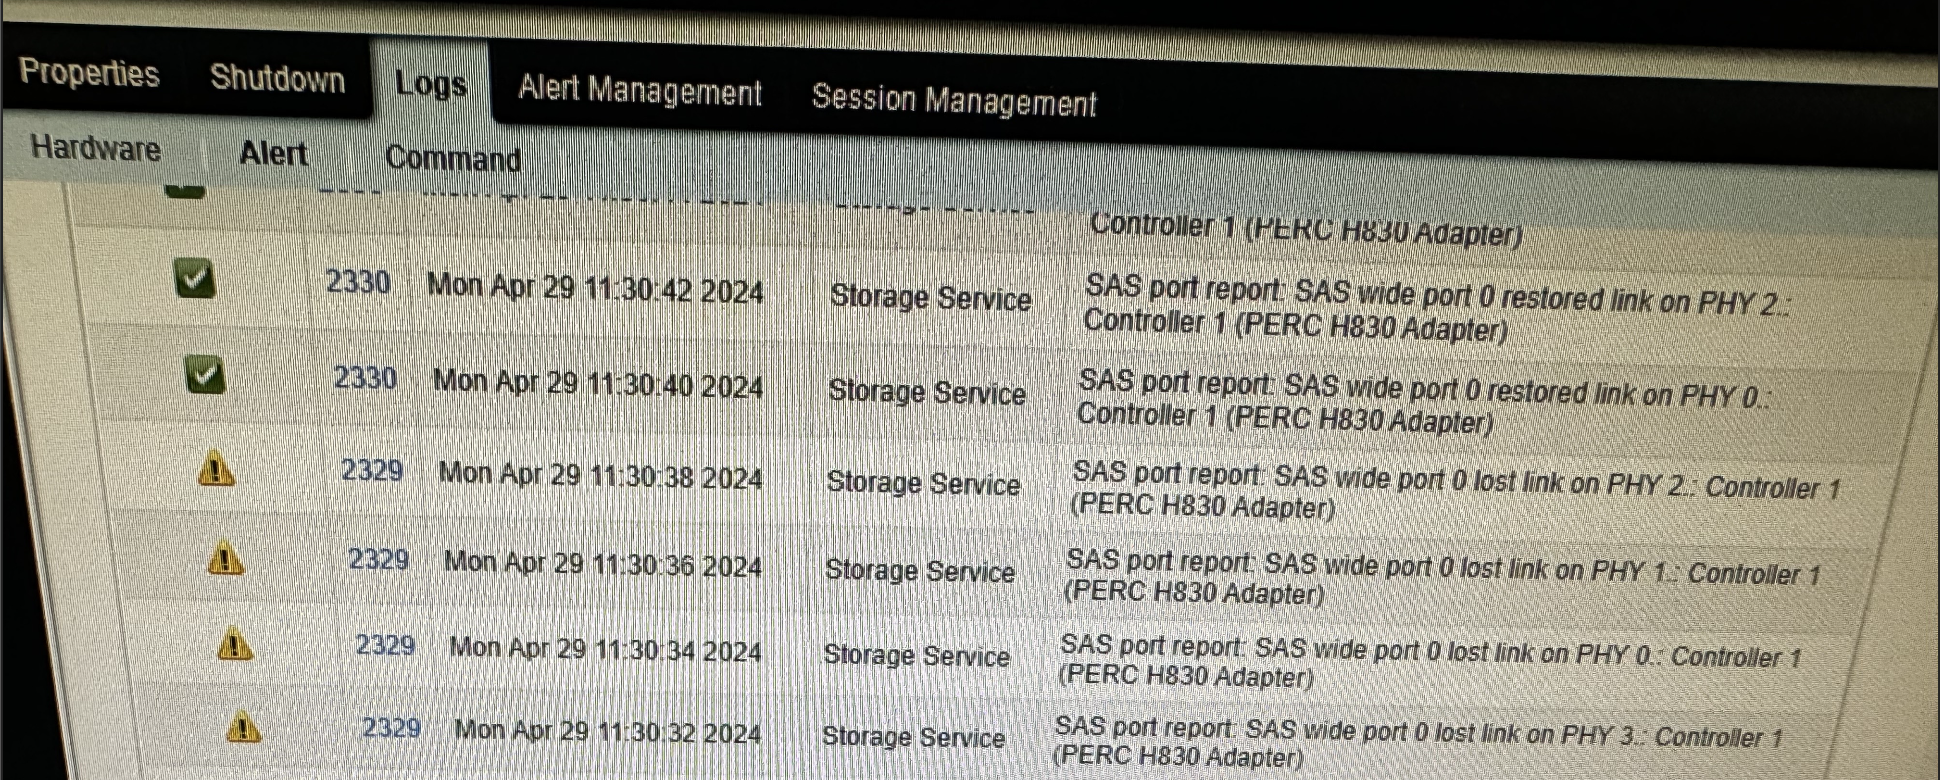 SAS wide port lost link on PHY